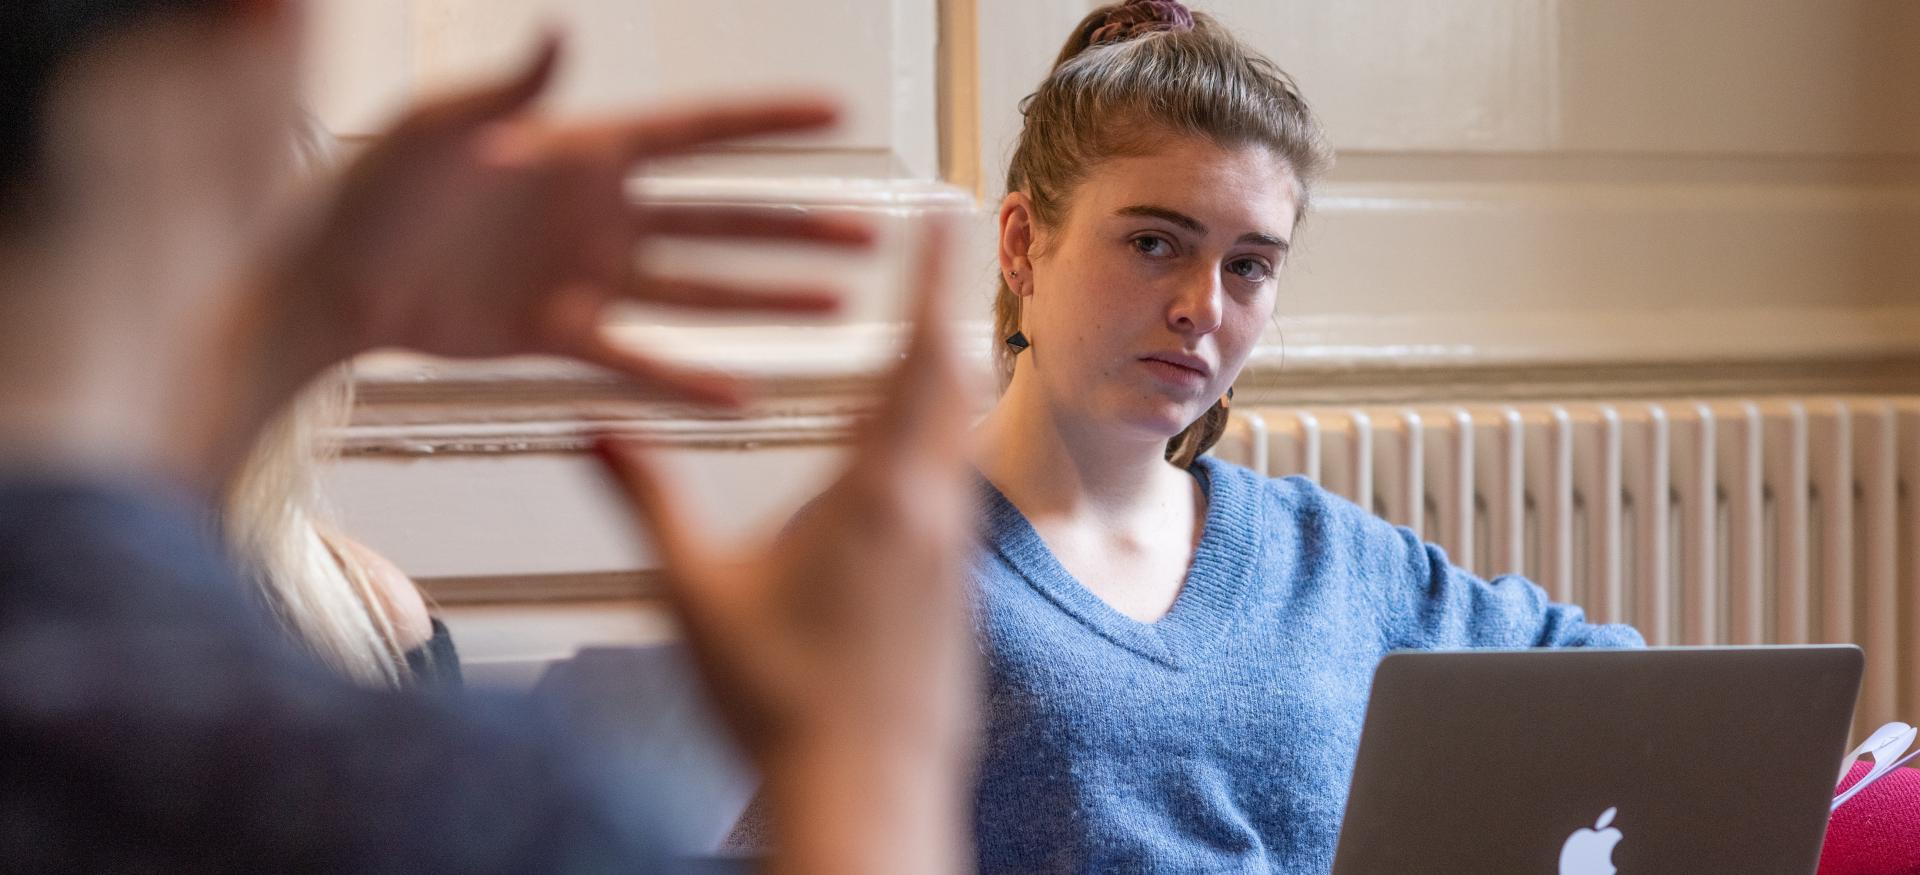 A tutor's hands gesture out of focus in the foreground while a student looks in concentration in the background.